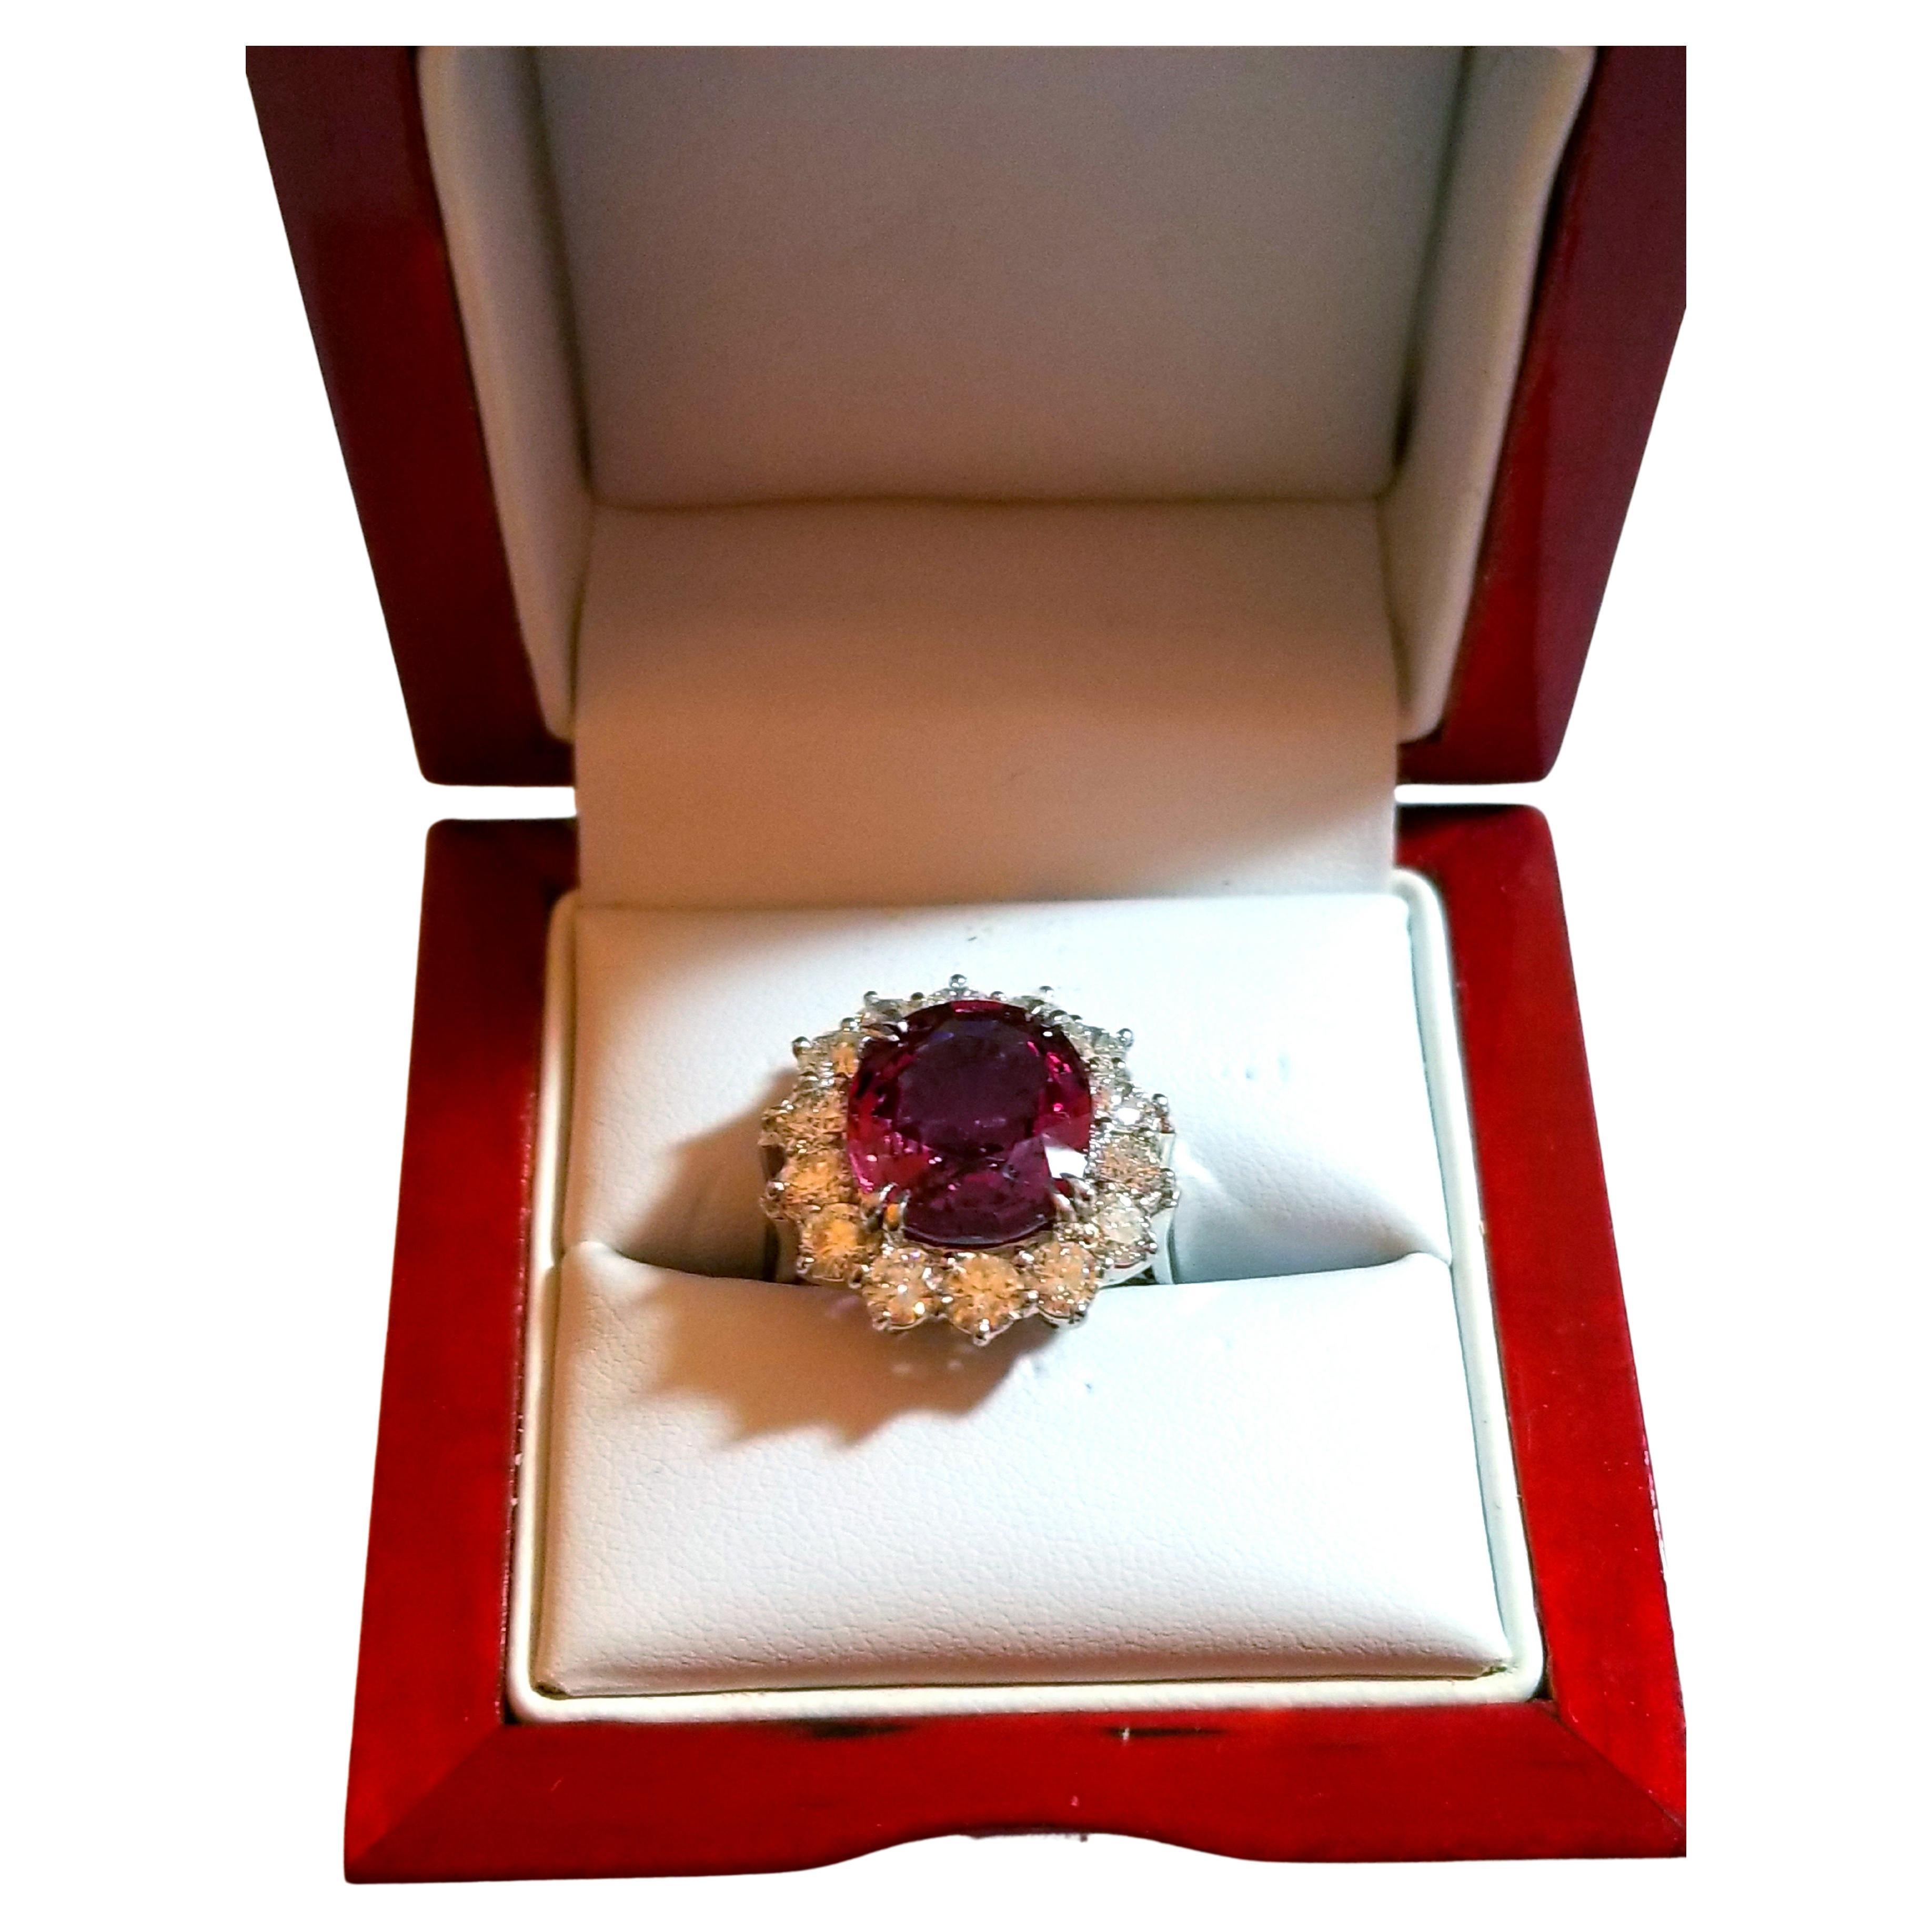  NEW Cert 6.77CT Unheated Natural Vivid Hot Pink Spinel Diamond Ring in Platinum